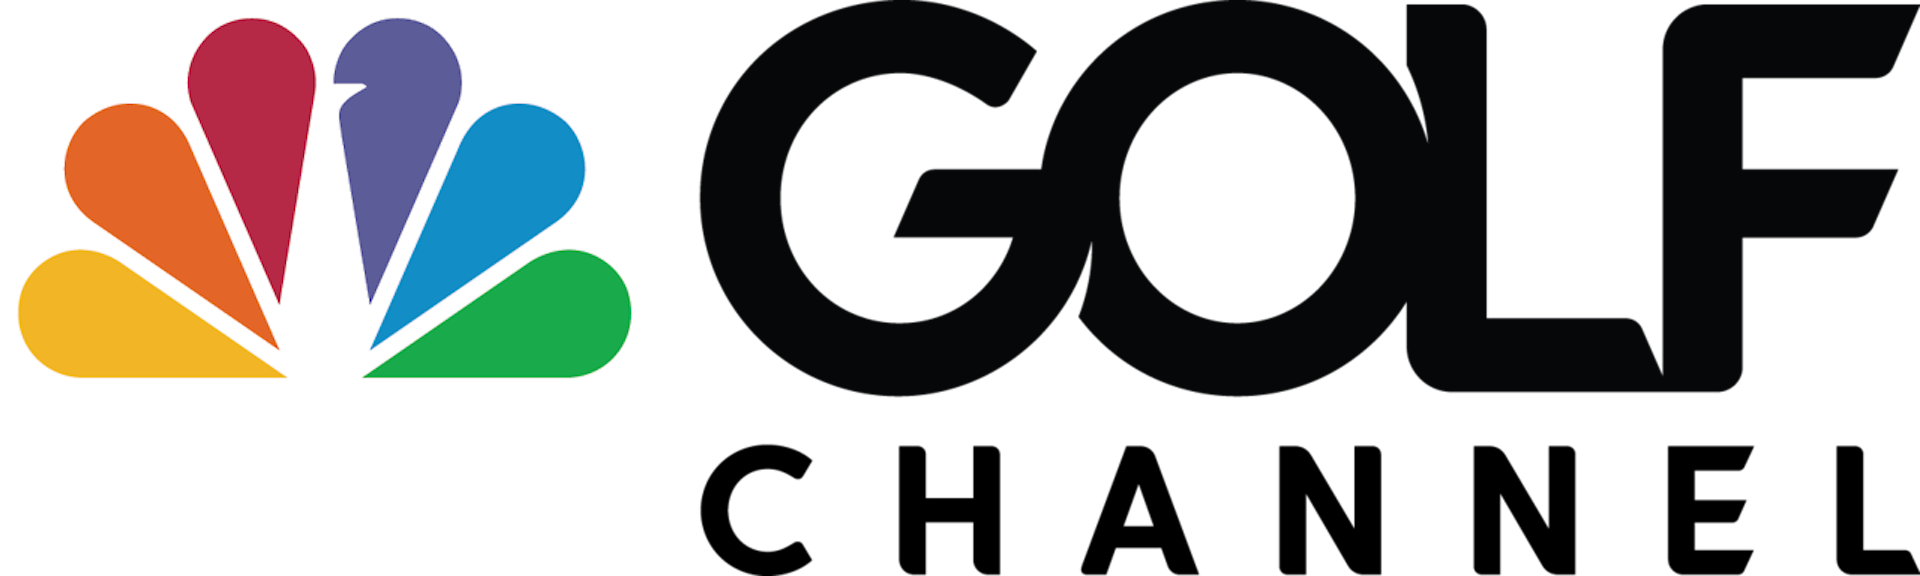 Golf Channel 2014 Logo.png - Golf, Transparent background PNG HD thumbnail